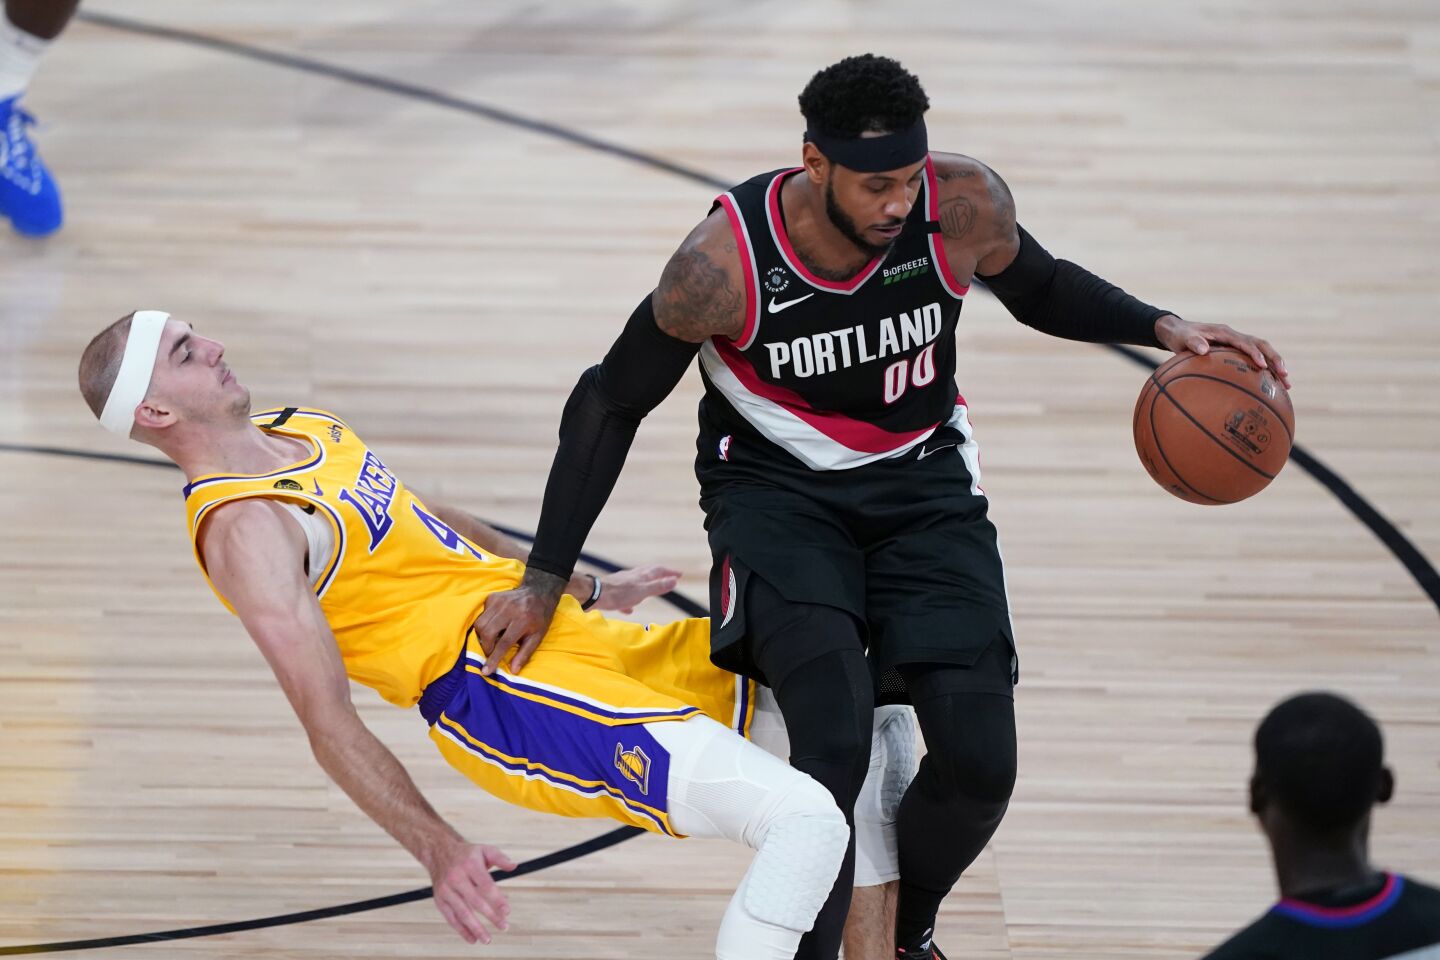 Lakers guard Alex Caruso falls to the court while defending Portland Trail Blazers forward Carmelo Anthony during the second half.